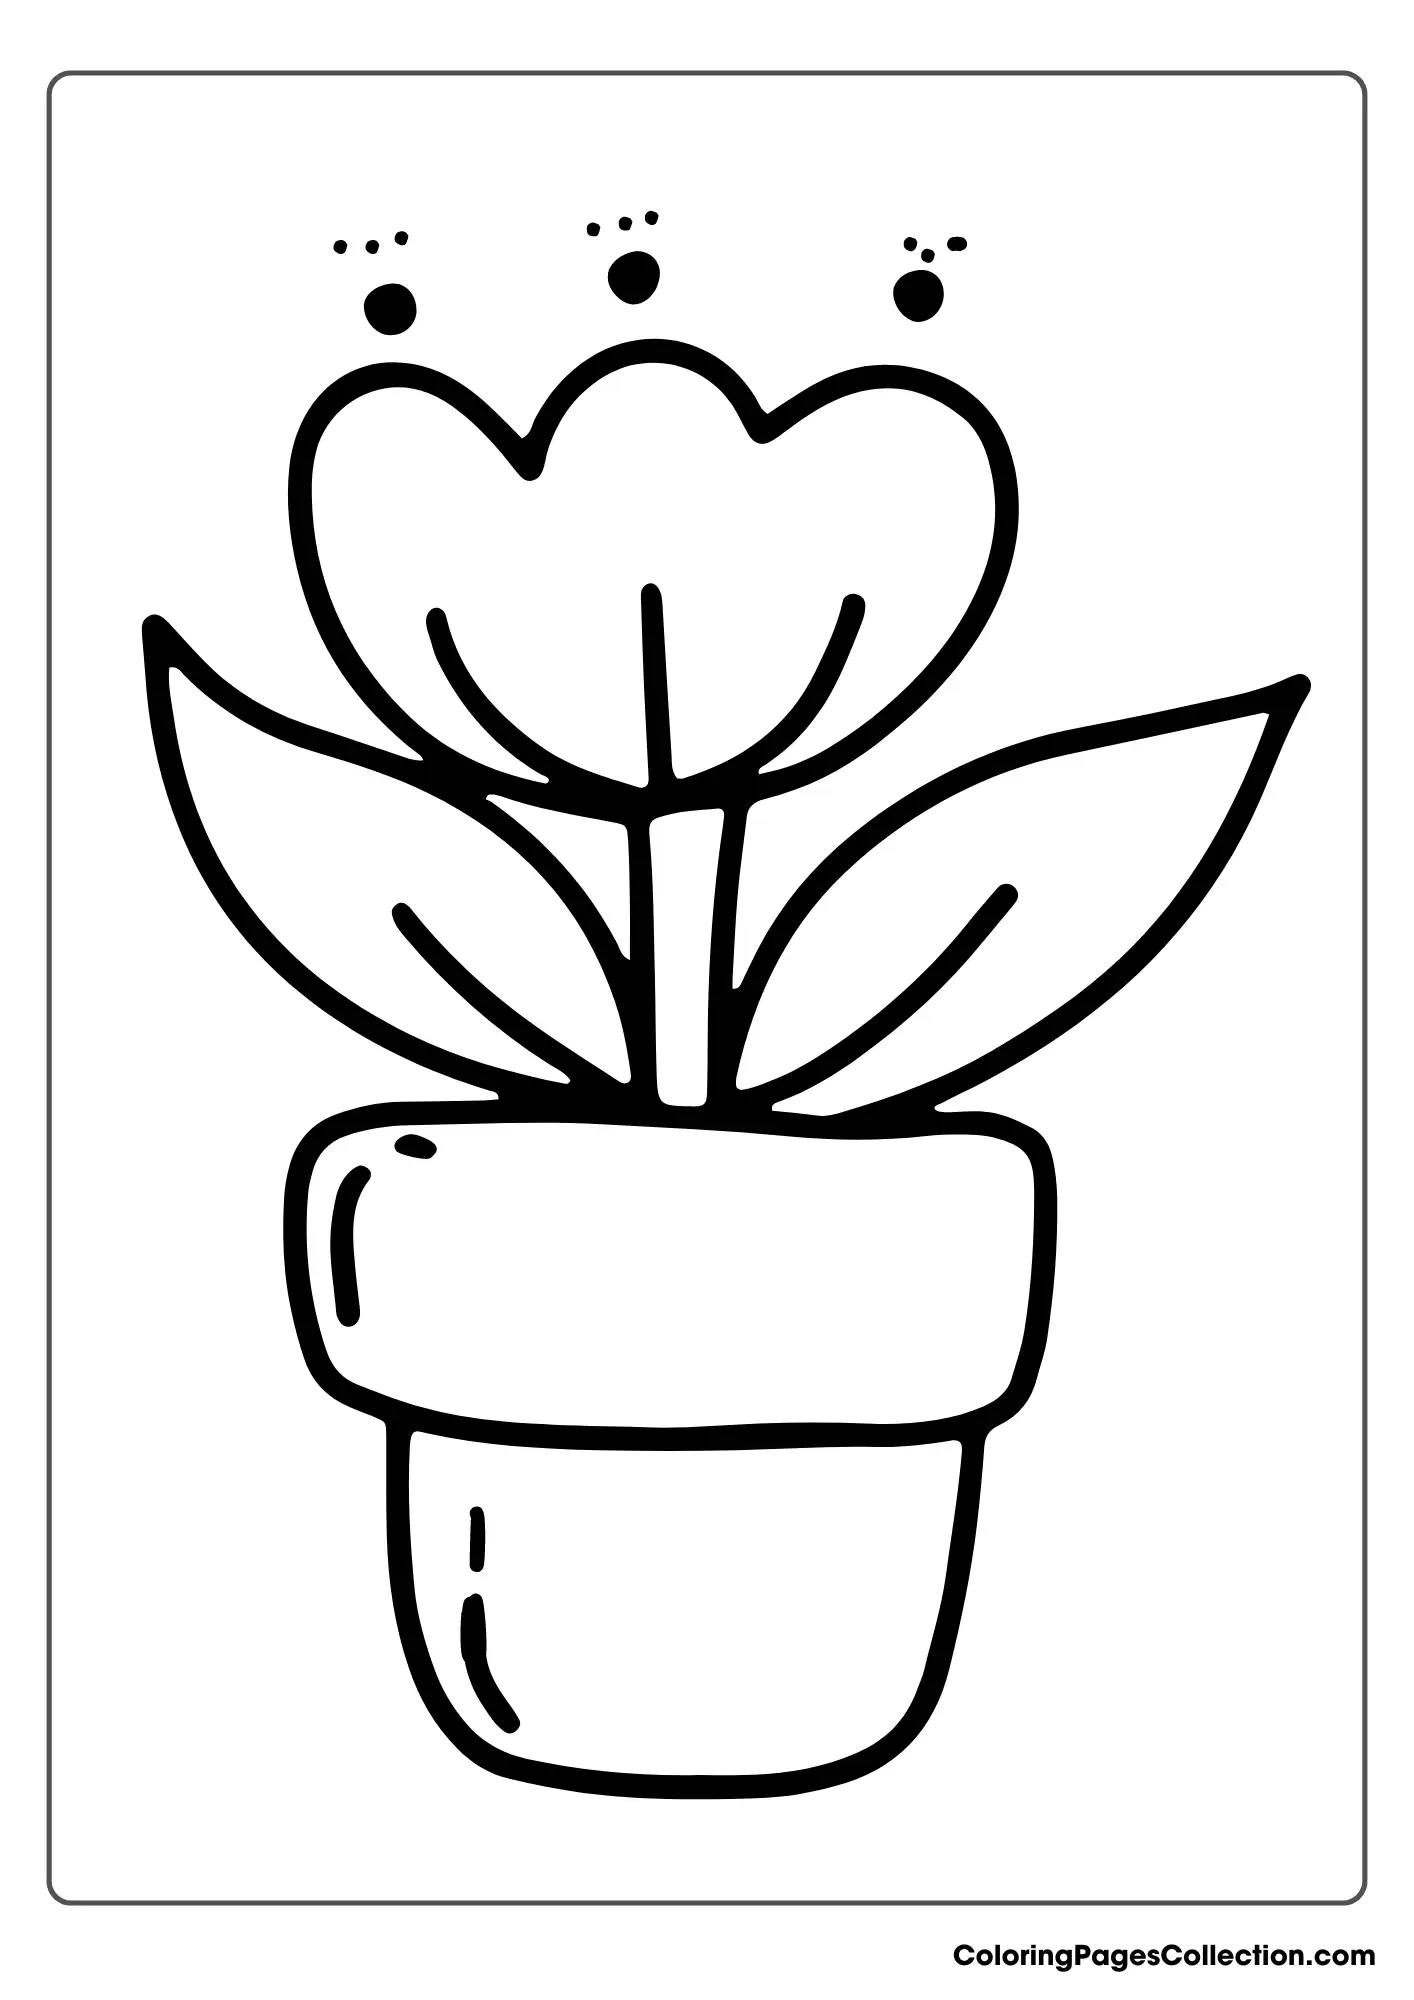 A Coloring Page Of A Flower In A Pot